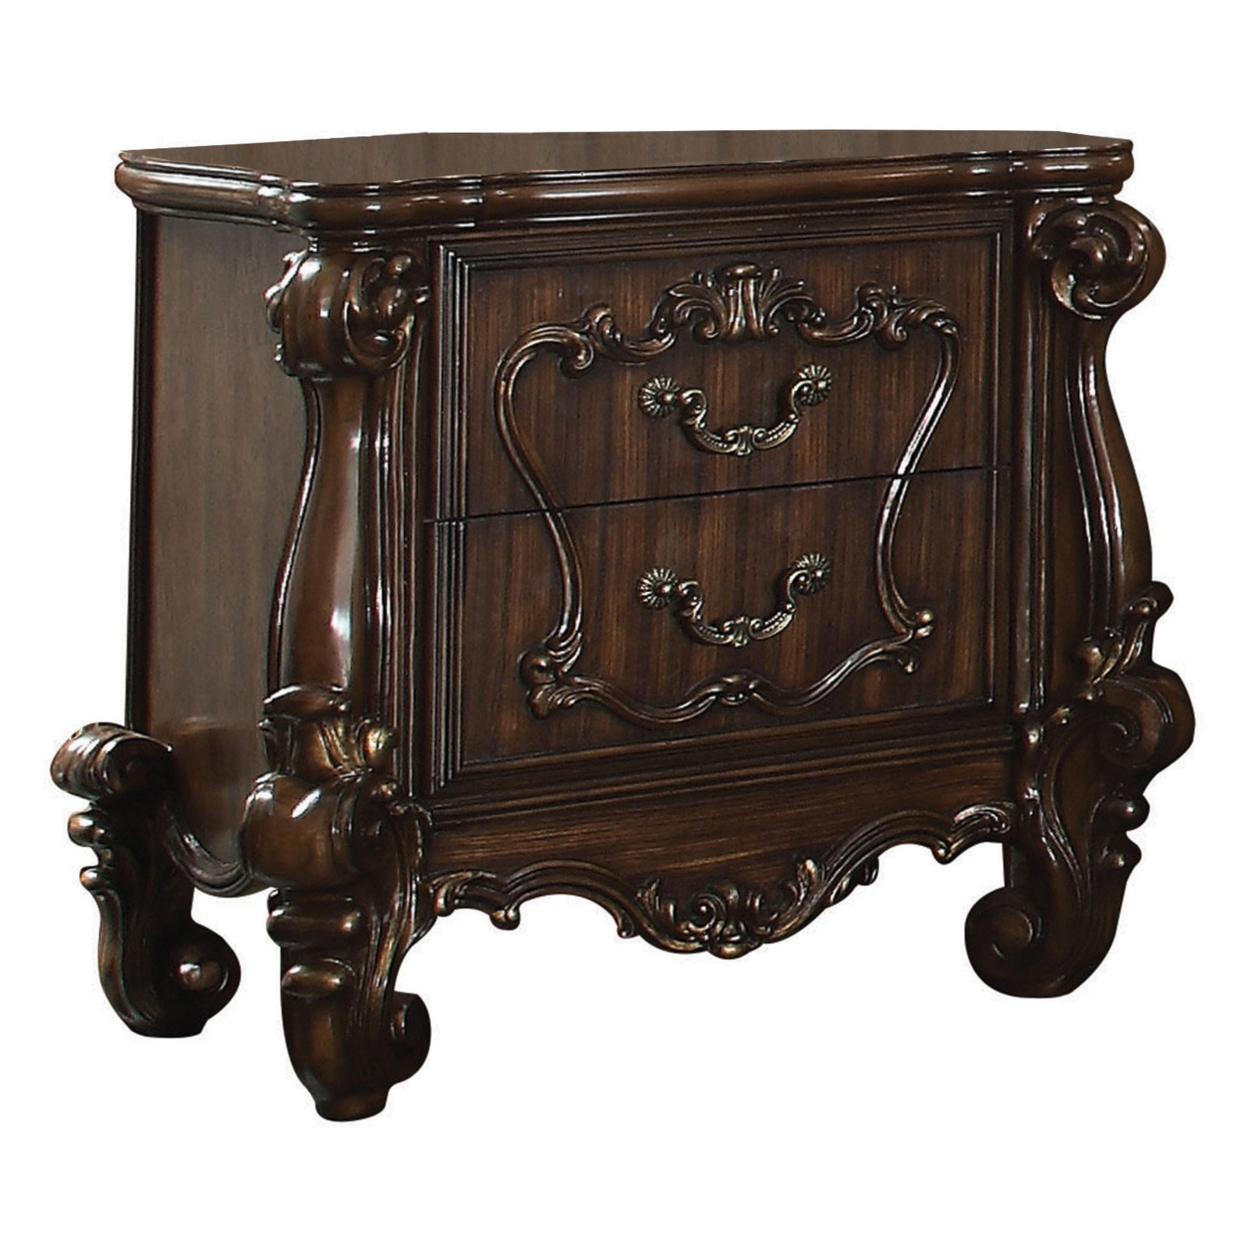 Traditional Wooden Nightstand With Antique Handles And Scrolled Legs, Brown- Saltoro Sherpi